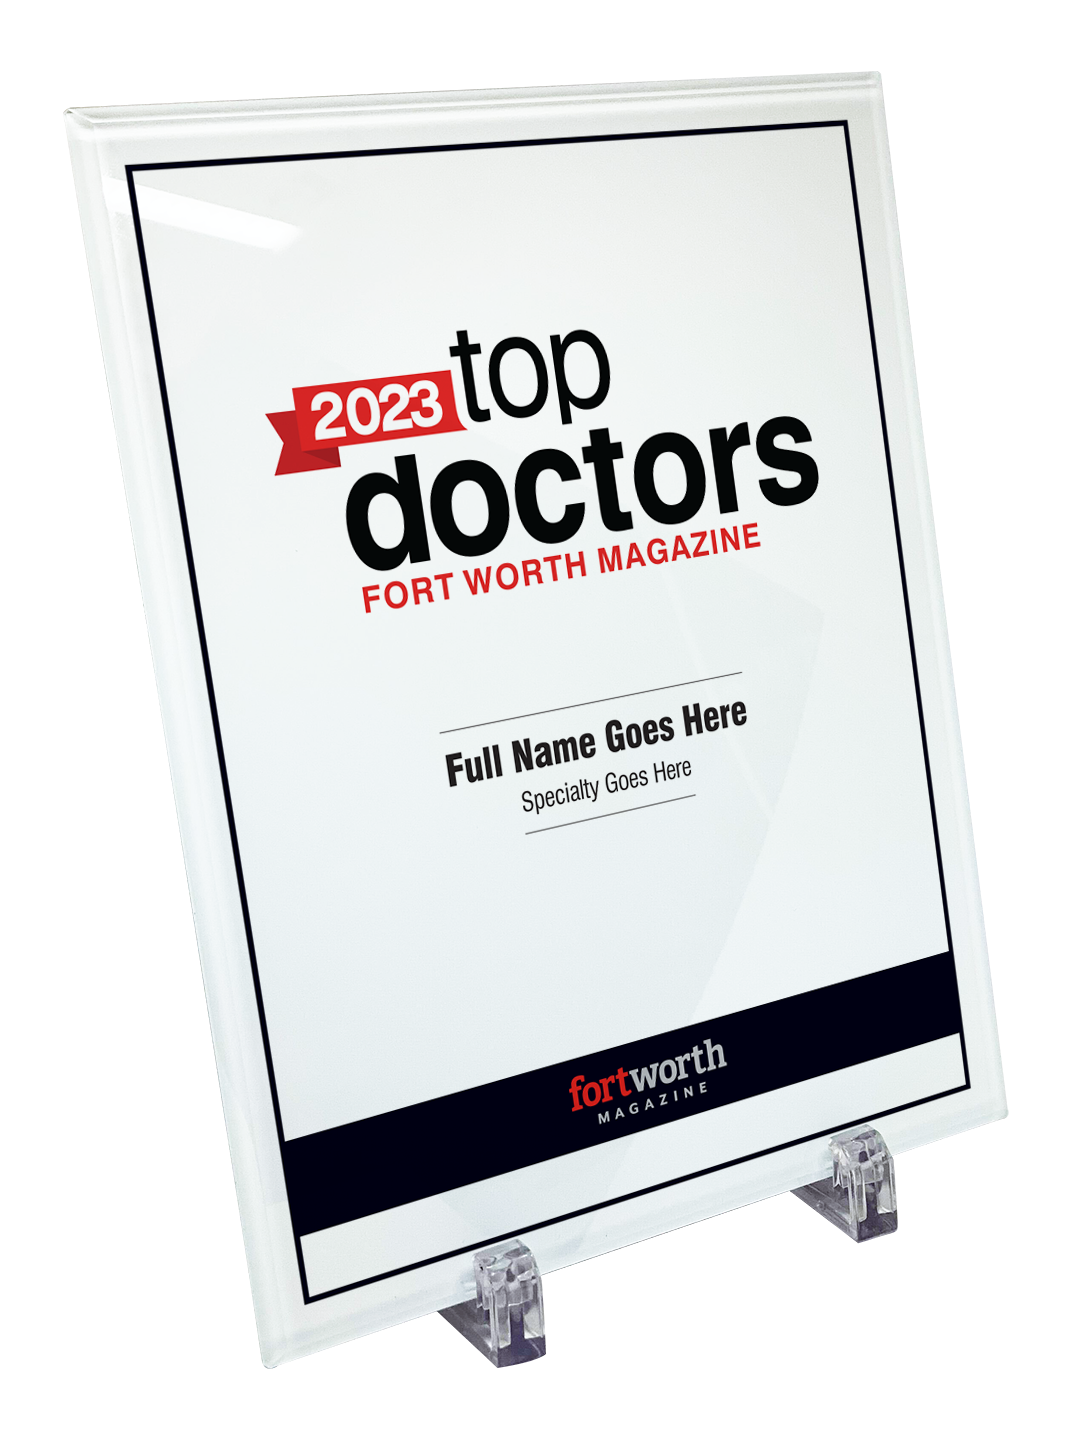 Fort Worth Magazine Top Doctor Crystal Plaque - Award